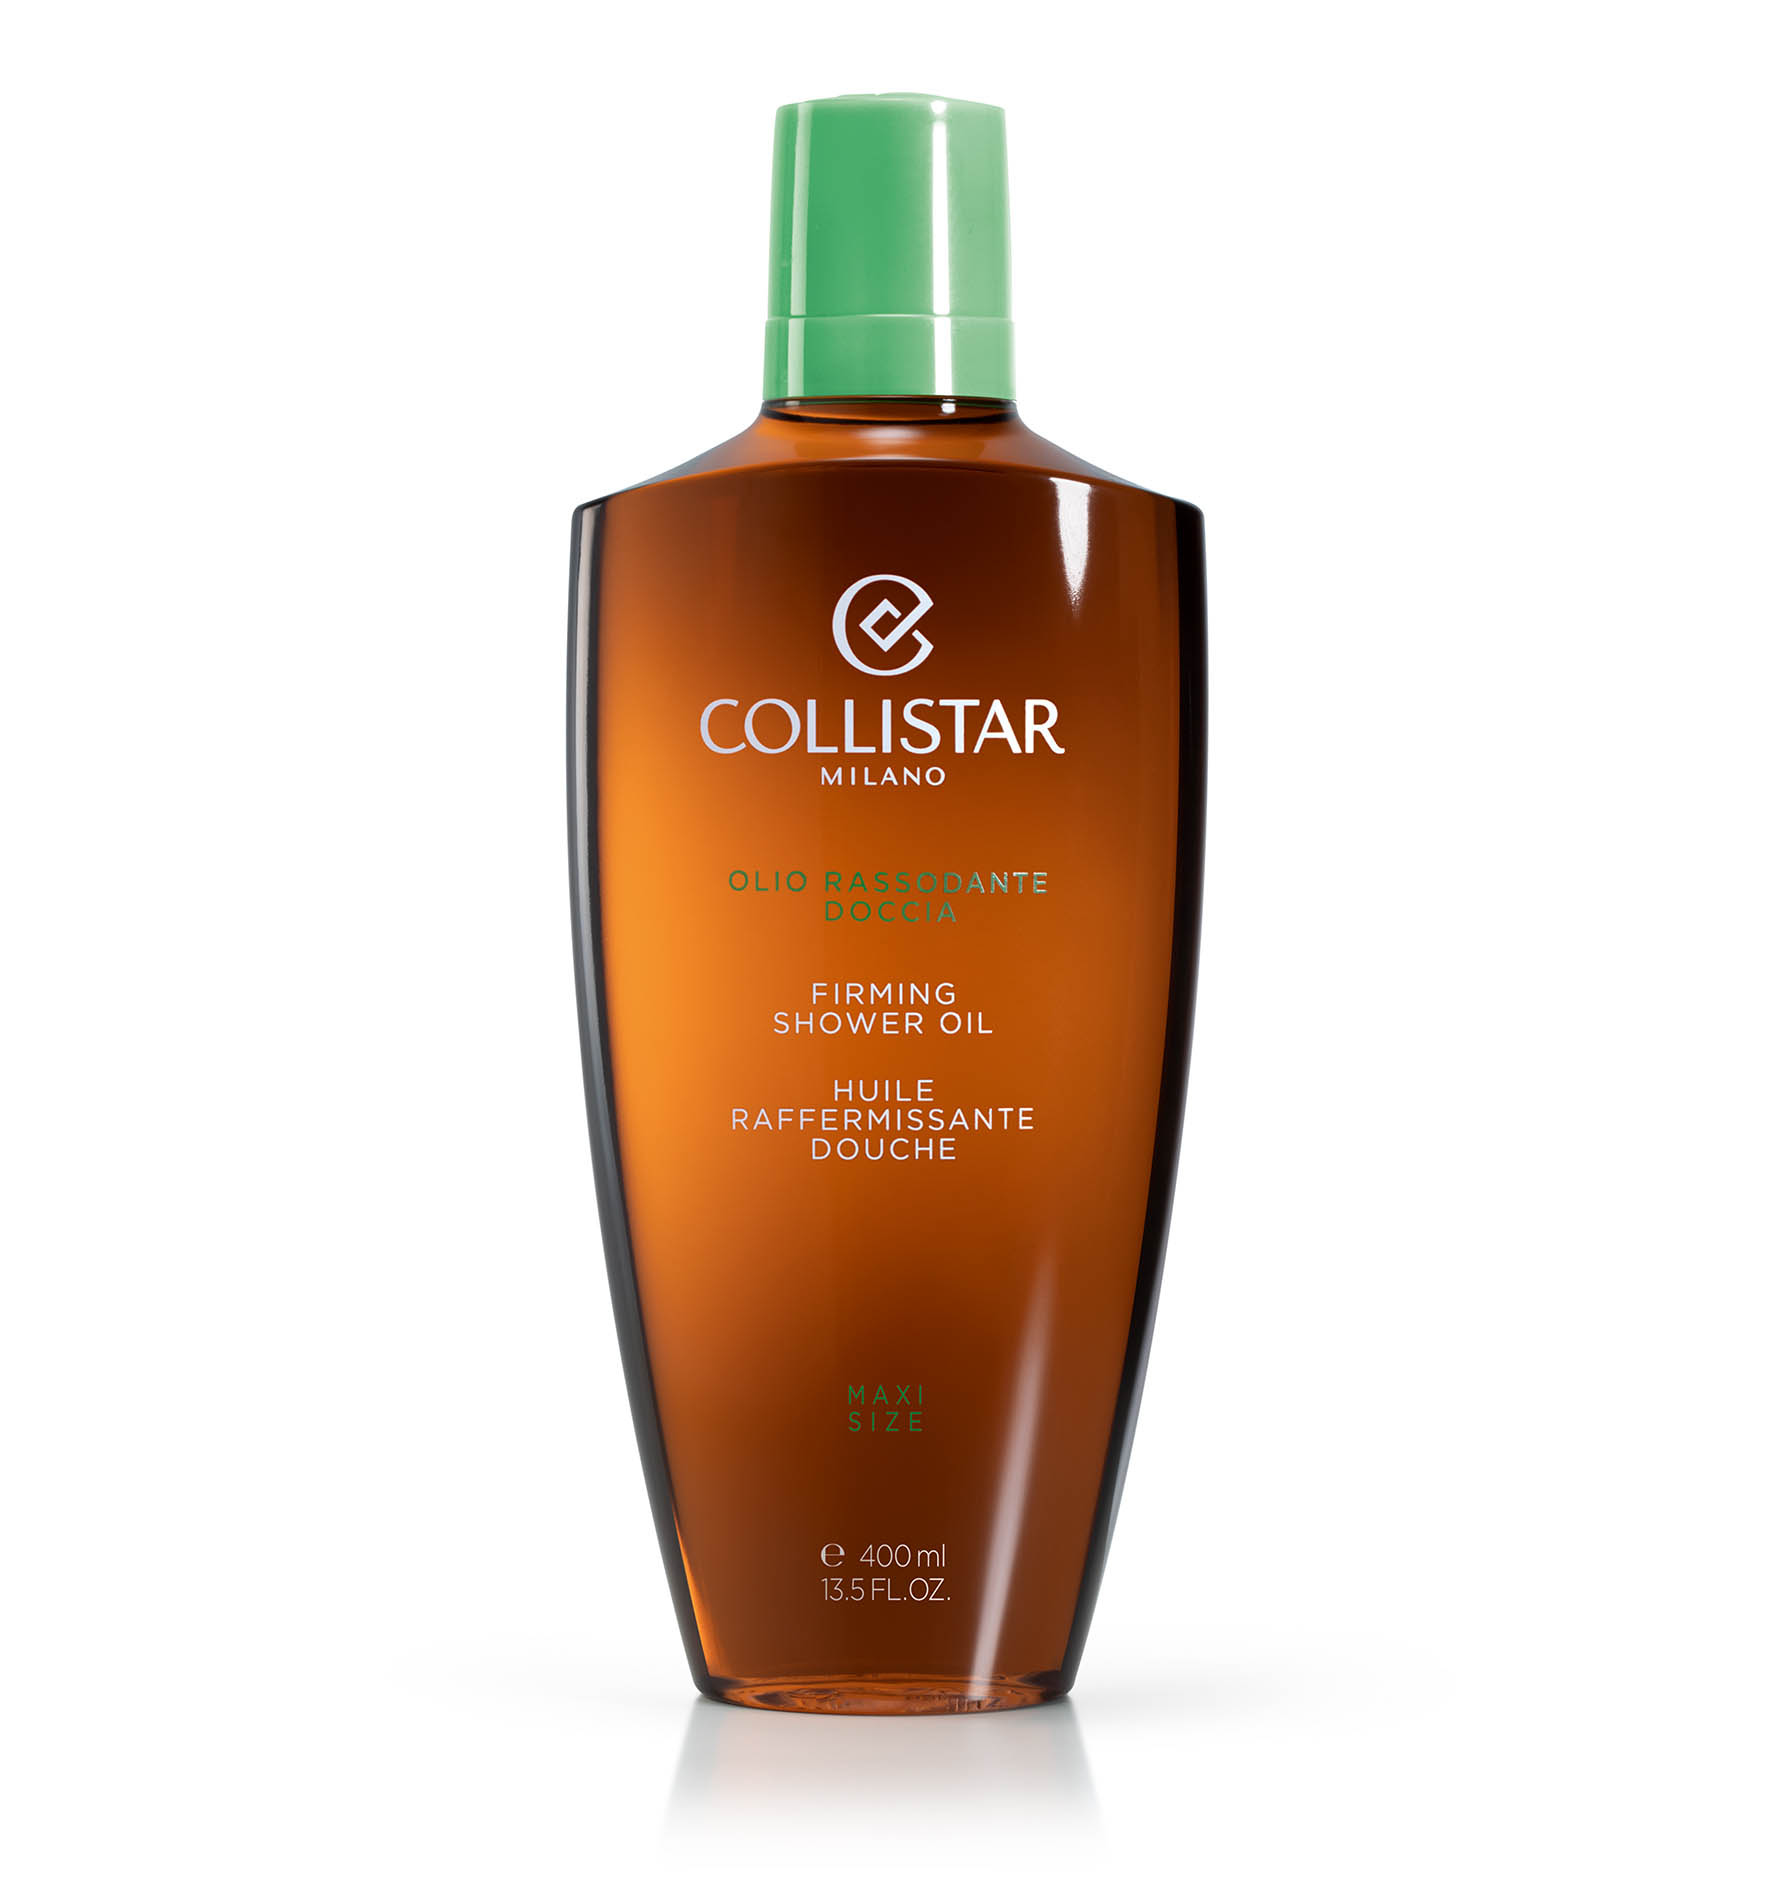 FIRMING SHOWER OIL - Relaxing body routine | Collistar - Shop Online Ufficiale